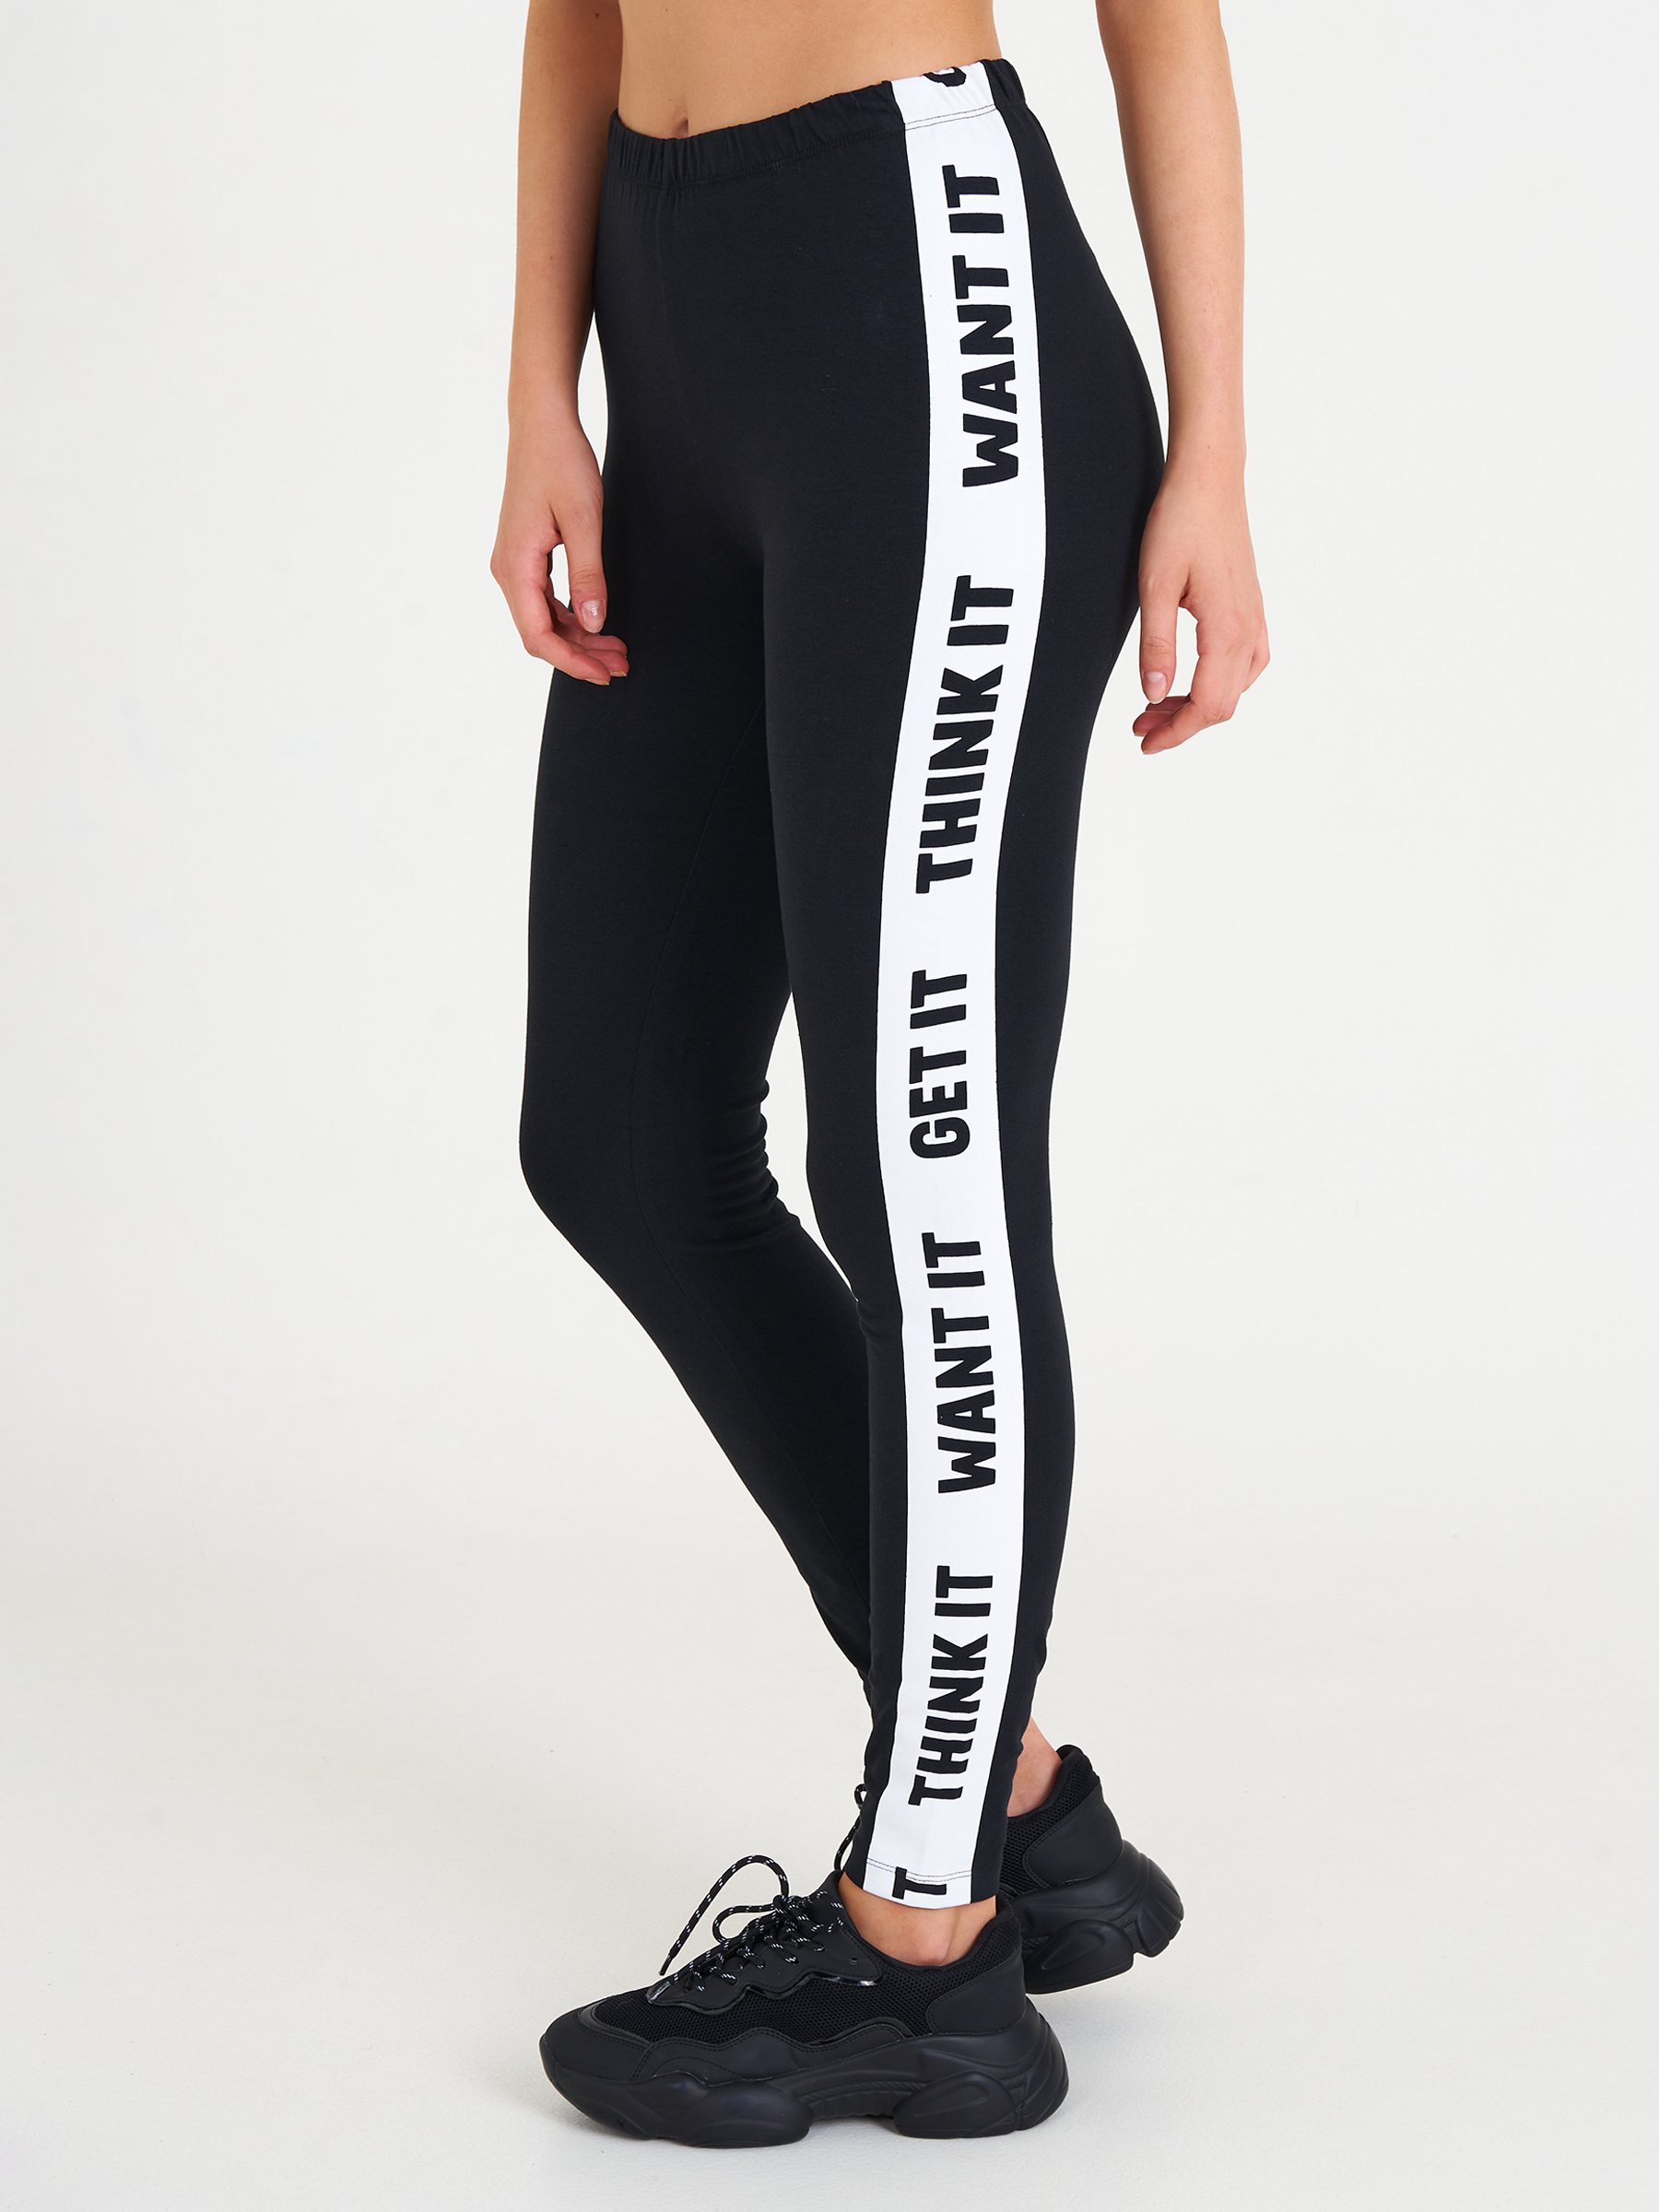 Cotton leggings with printed waistband